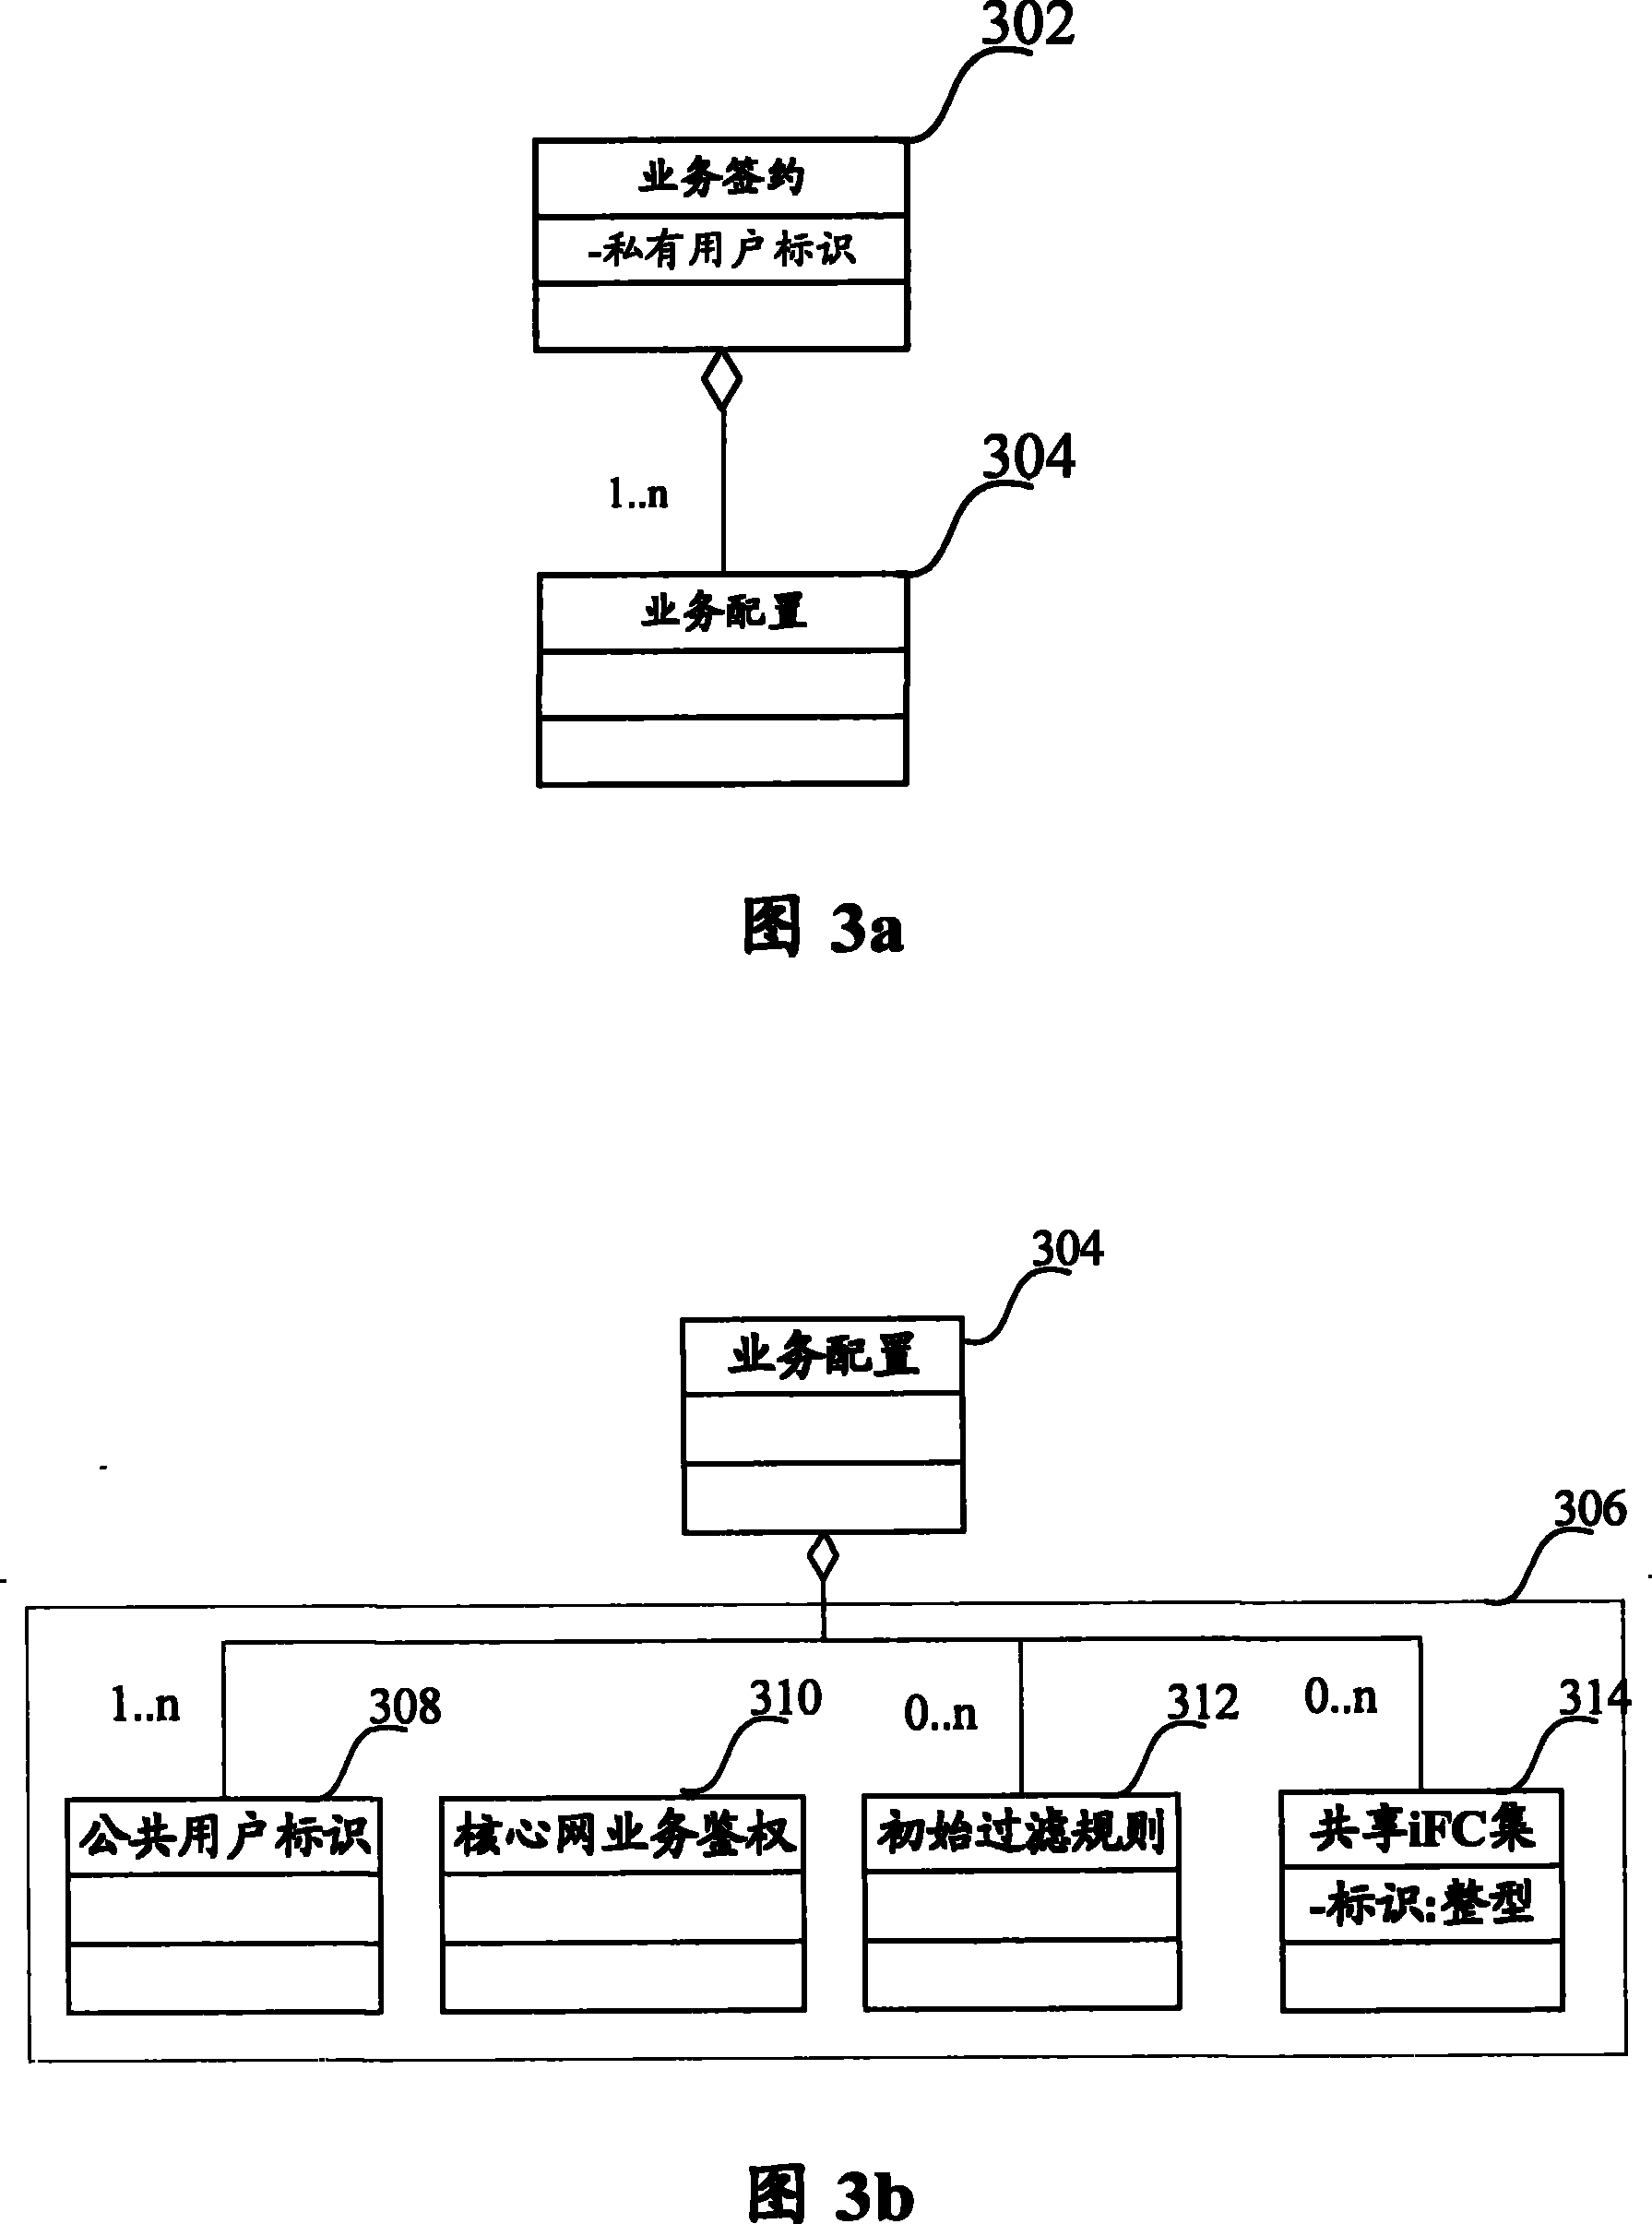 Method for processing PRI conflict of initial filtrating rules